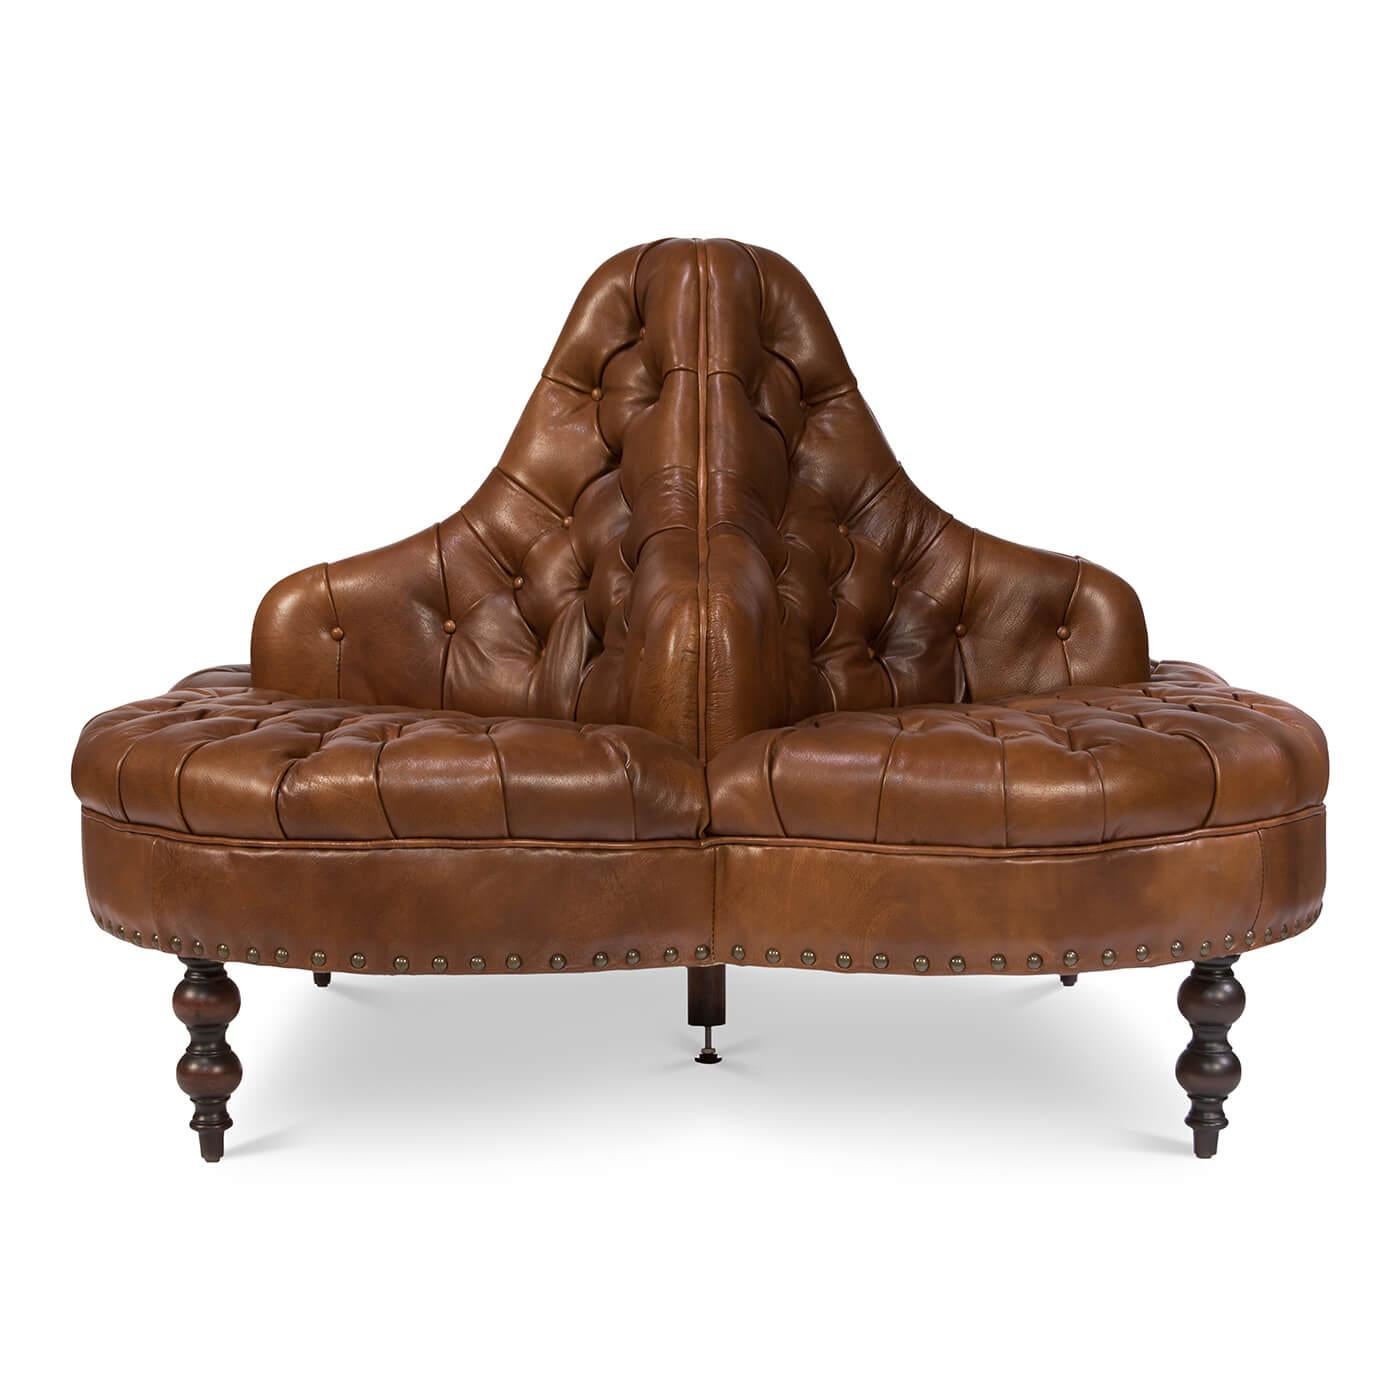 A Classic style four-sided sofa ideal for a large lobby or foyer. With vintage style brown tufted leather upholstered backrests and seats, raised on turned mahogany feet and finished with brass nailhead trim.

Dimensions: 57